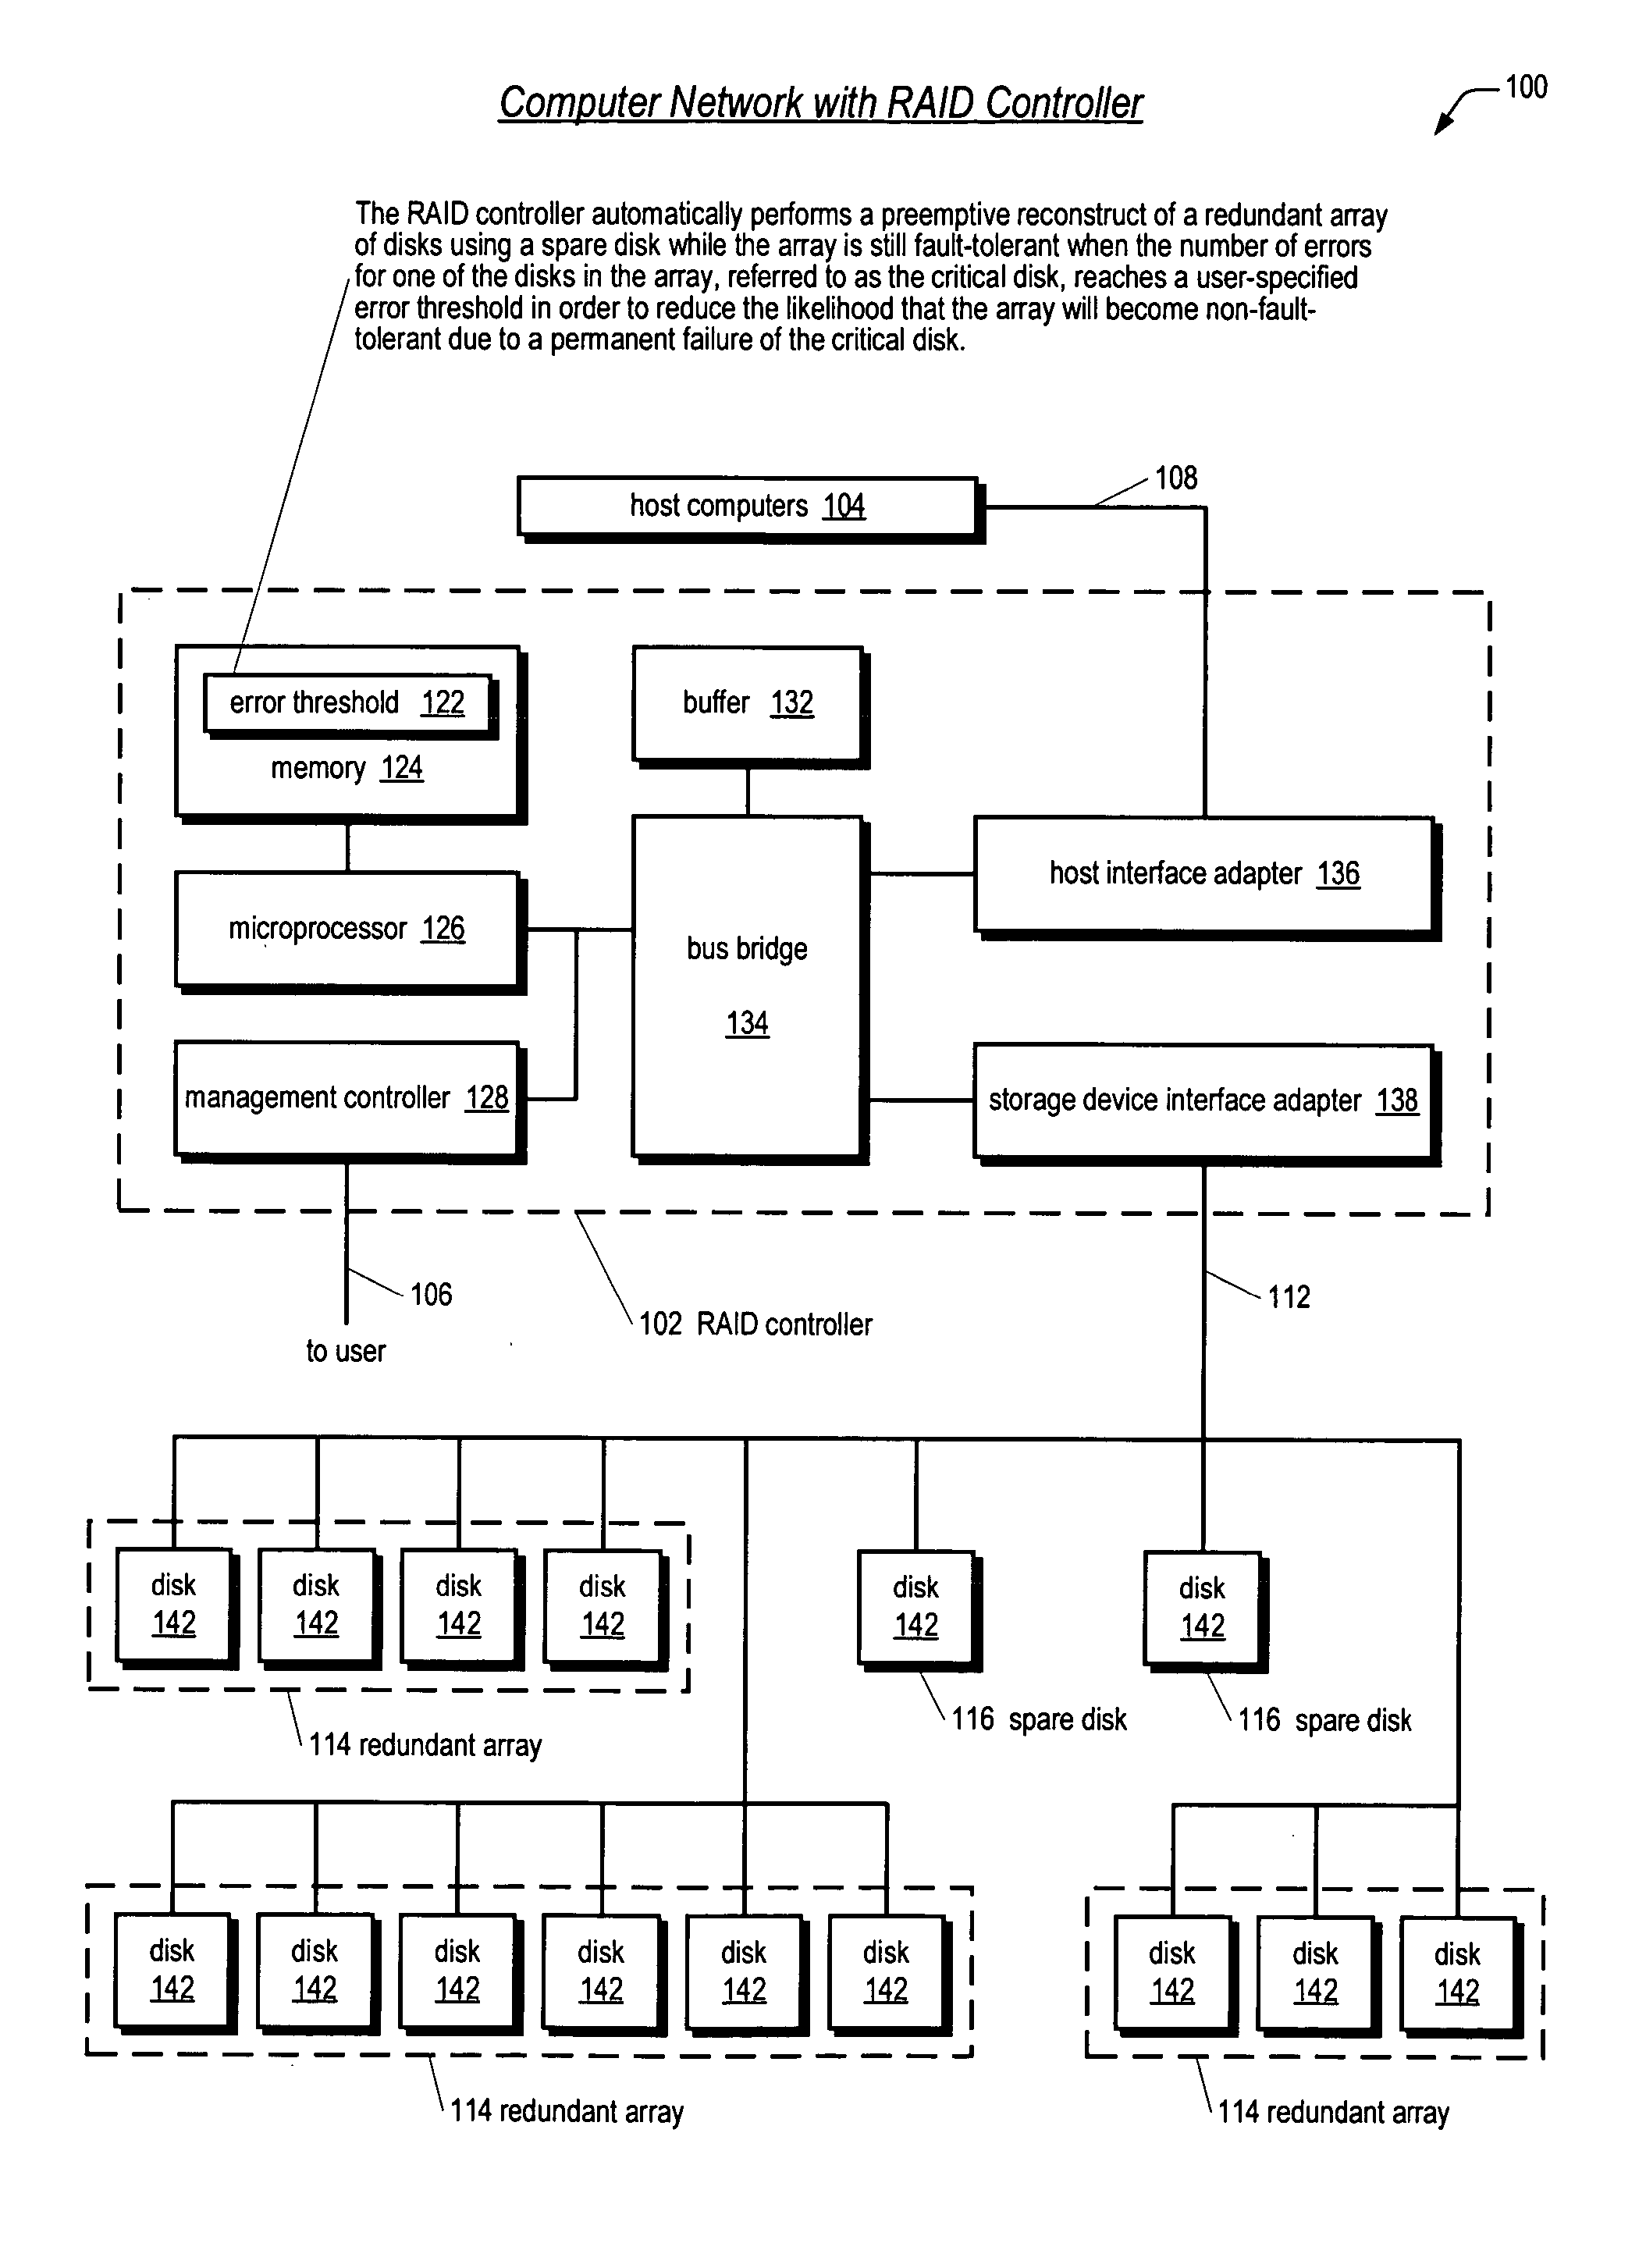 Apparatus and method for performing a preemptive reconstruct of a fault-tolerand raid array